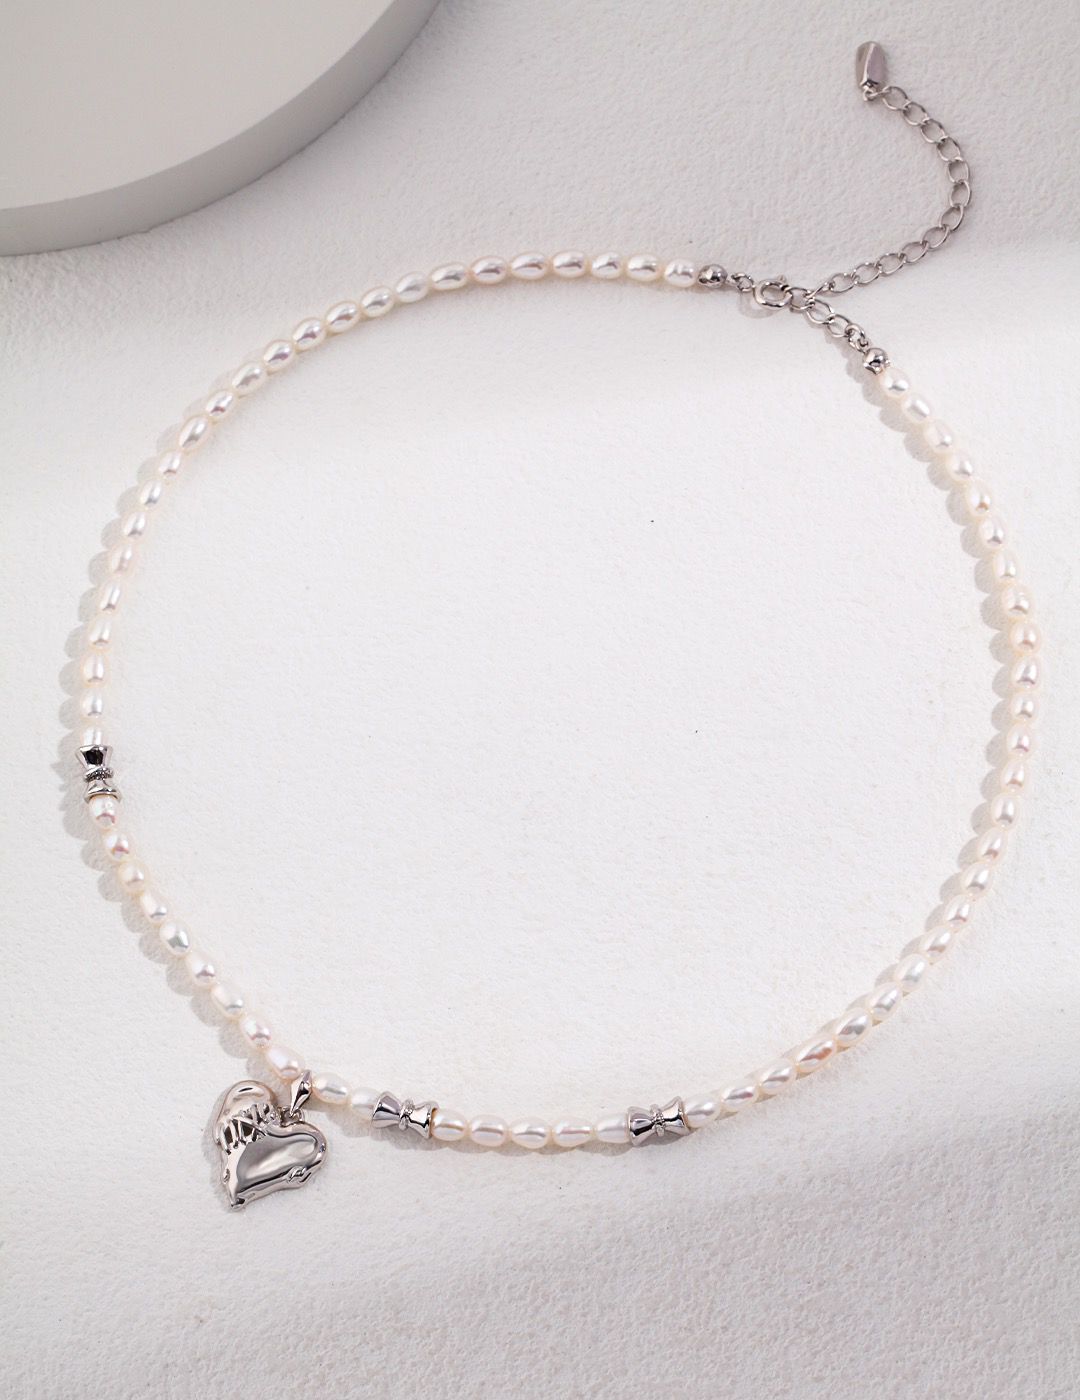 Silver heart necklace with freshwater pearls